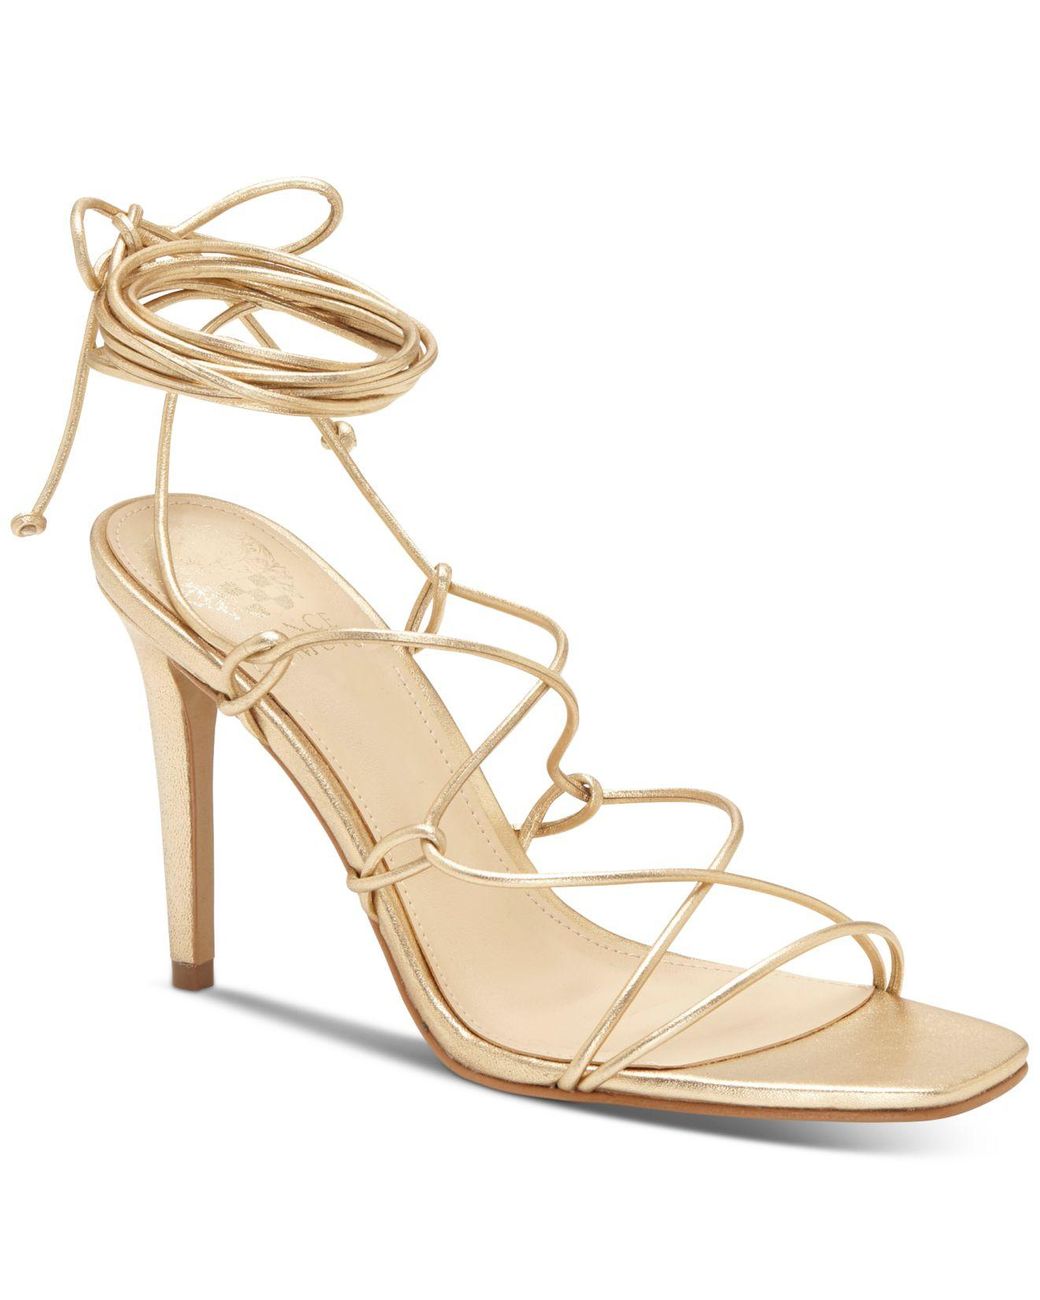 Vince Camuto Leather Natola Strappy Dress Sandals in Gold (Metallic) | Lyst